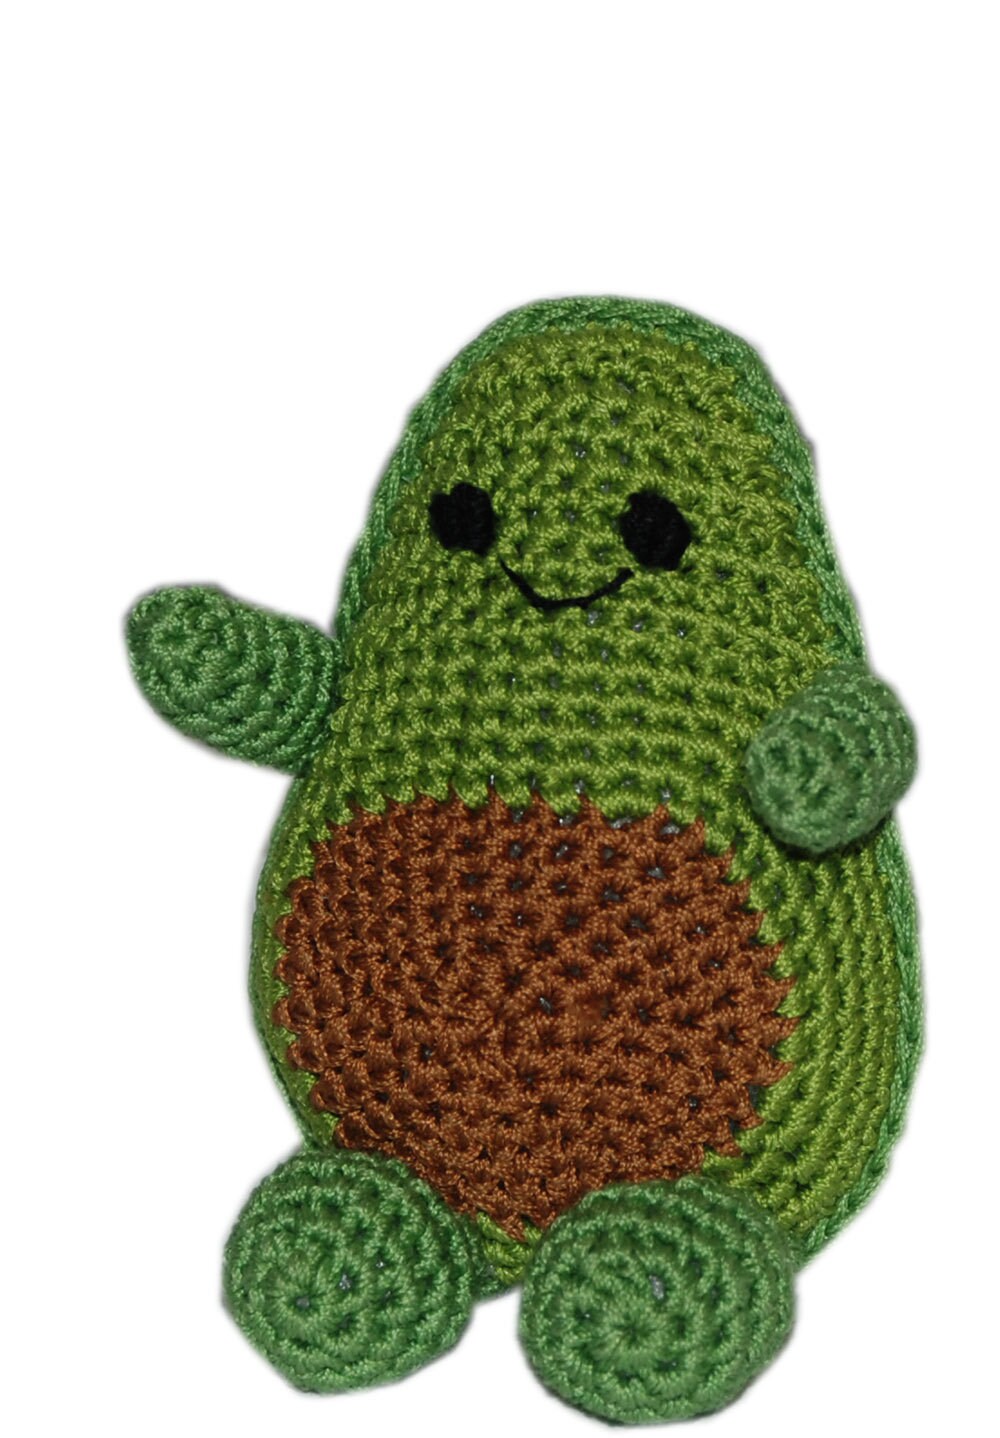 Knit Knacks Organic Cotton Pet & Dog Toys, (Choose from: Pizza, Avocado, Monster, Shark, Whale or Cactus)-2